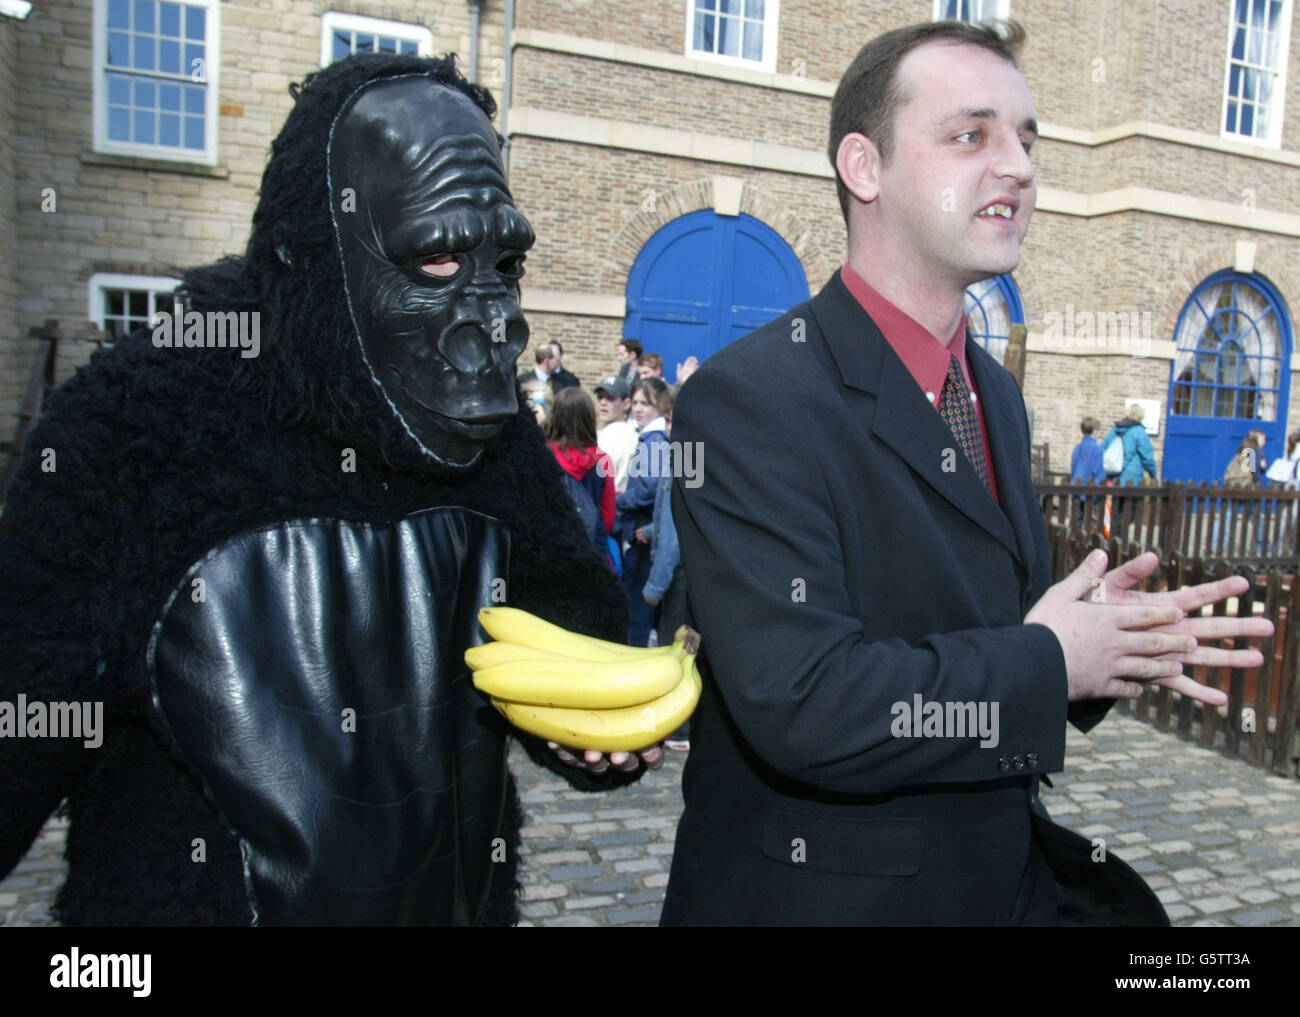 Stuart Drummond (right) - who dresses as H'Angus, the mascot for Hartlepool United Football Club - walks with a rival through the town after he was elected Mayor in the local council elections. Local legend says that a monkey was once hanged in the town on suspicion of spying. * Drummond left the Labour candidate trailing in second place and now takes up the post, which pays more than 53,000-a-year. Stock Photo